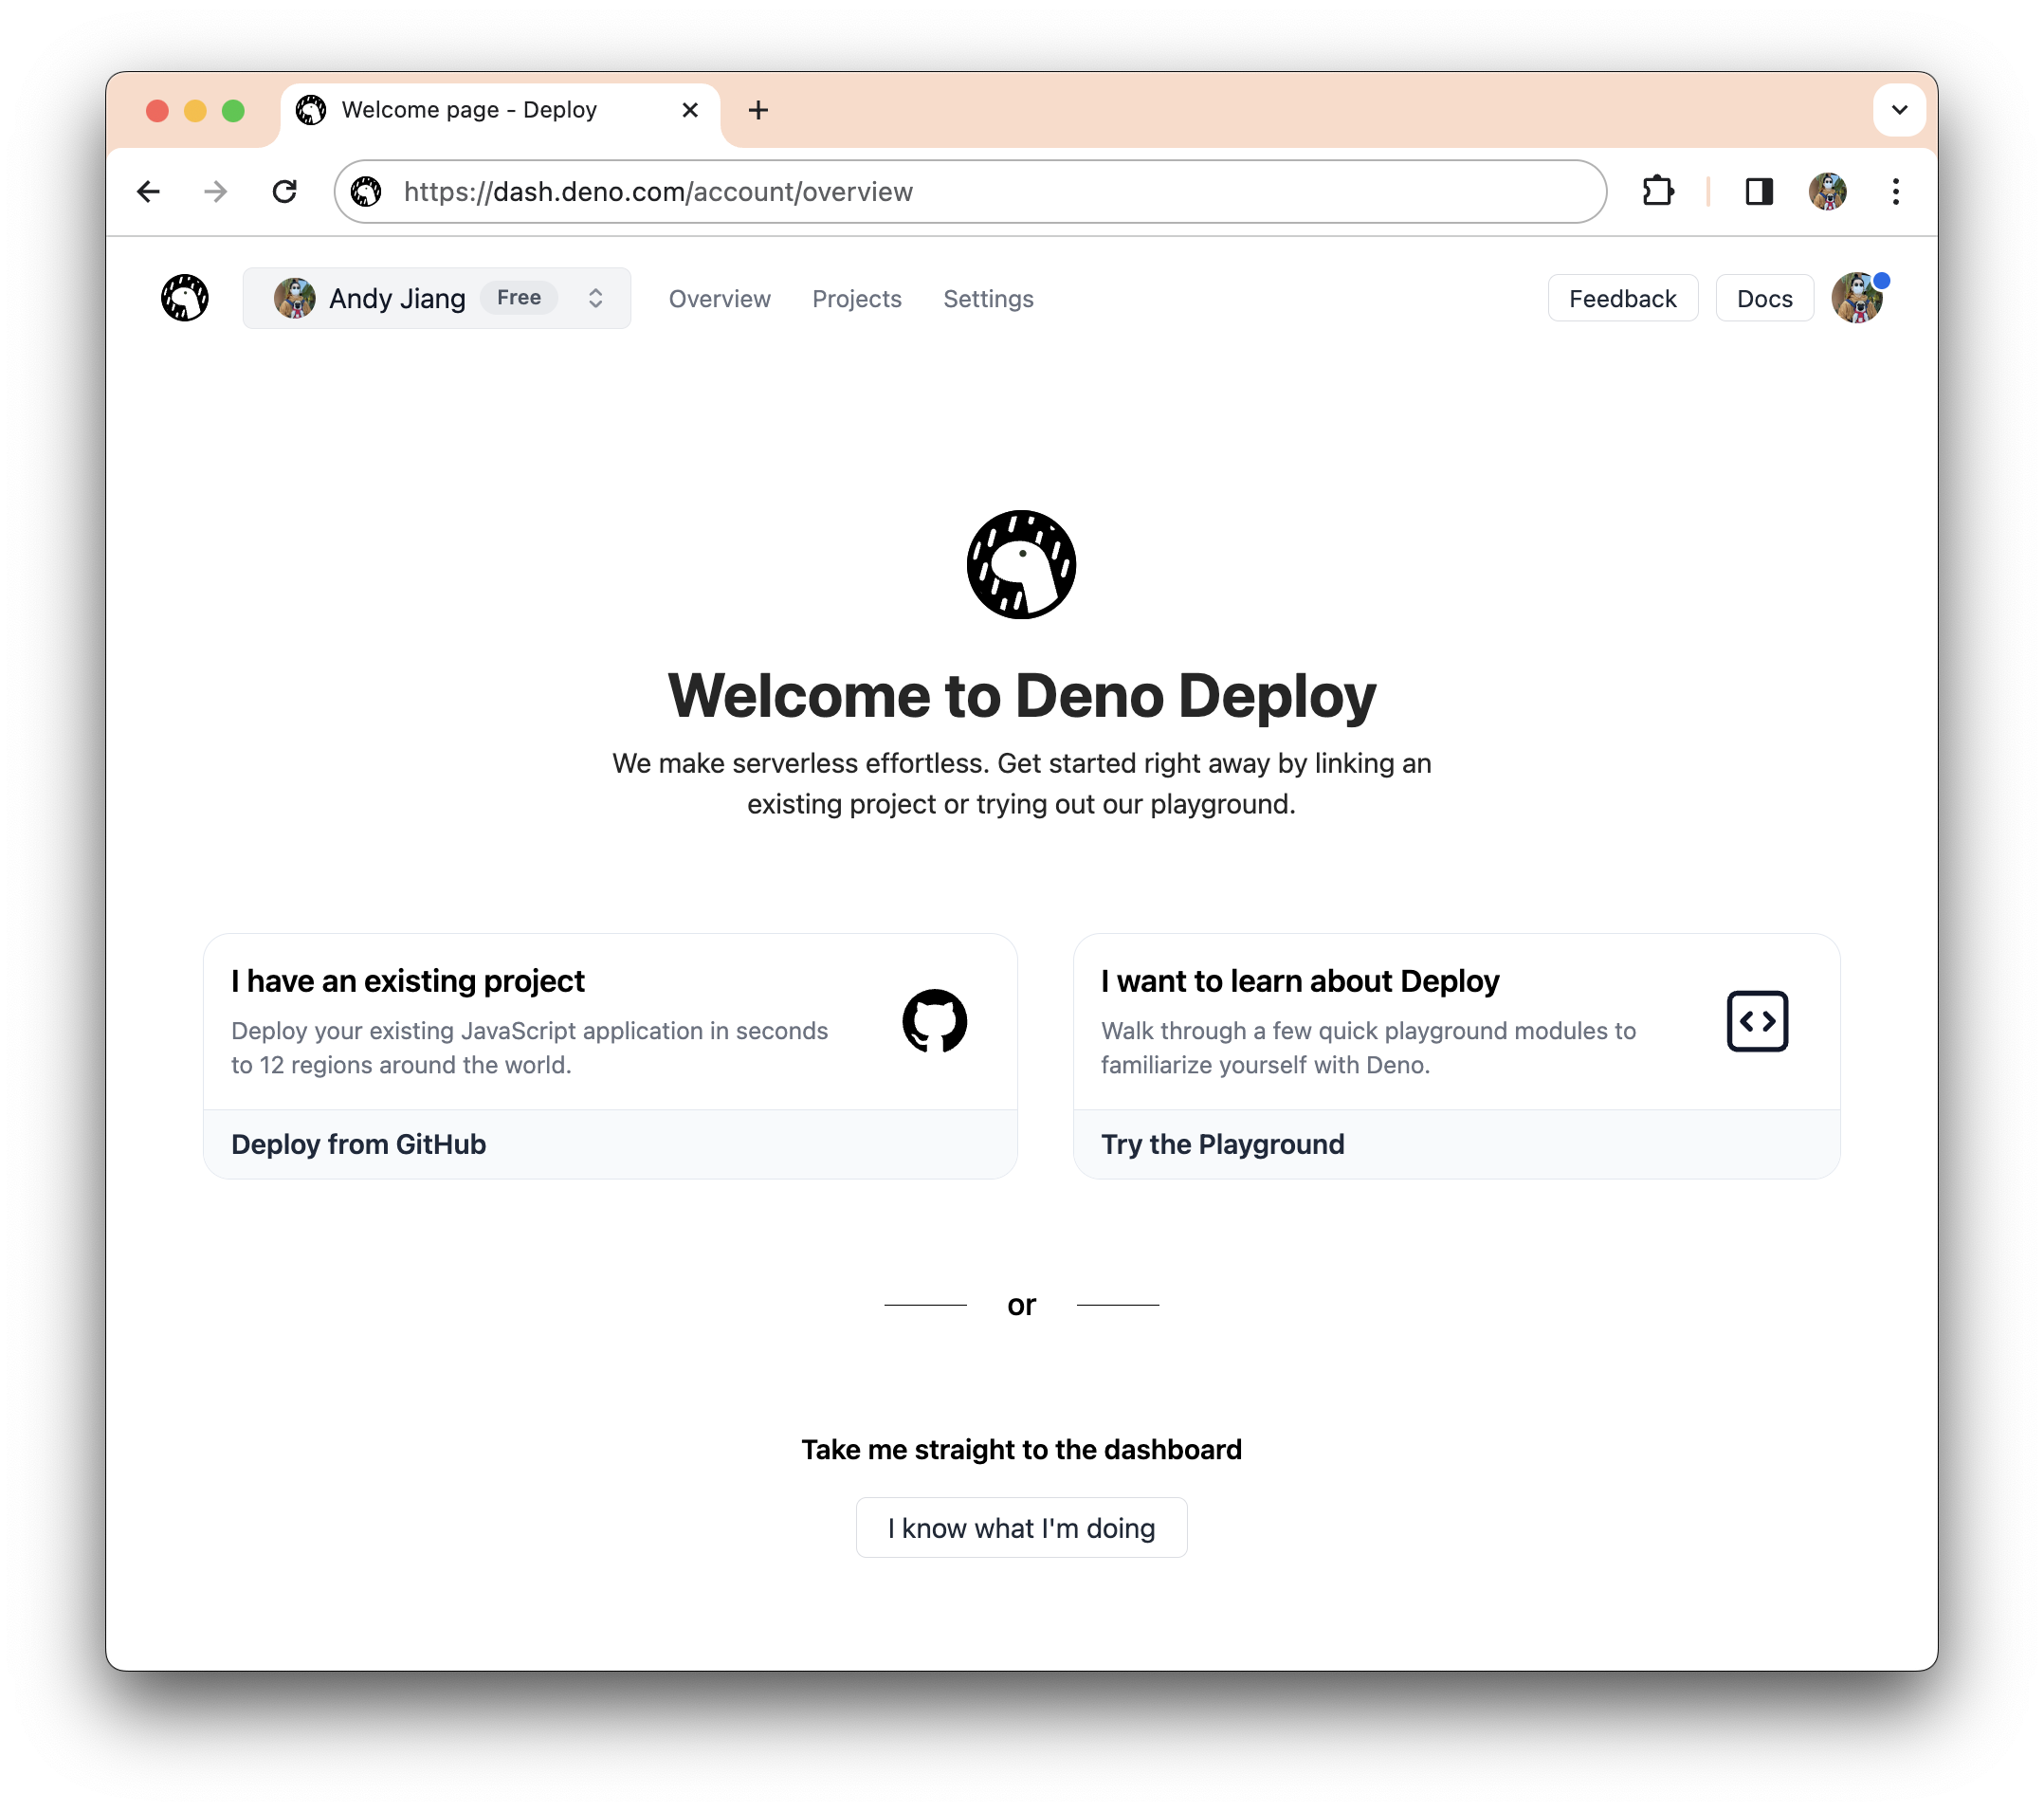 The new welcome page in Deno Deploy gives you options for how to create a new project.